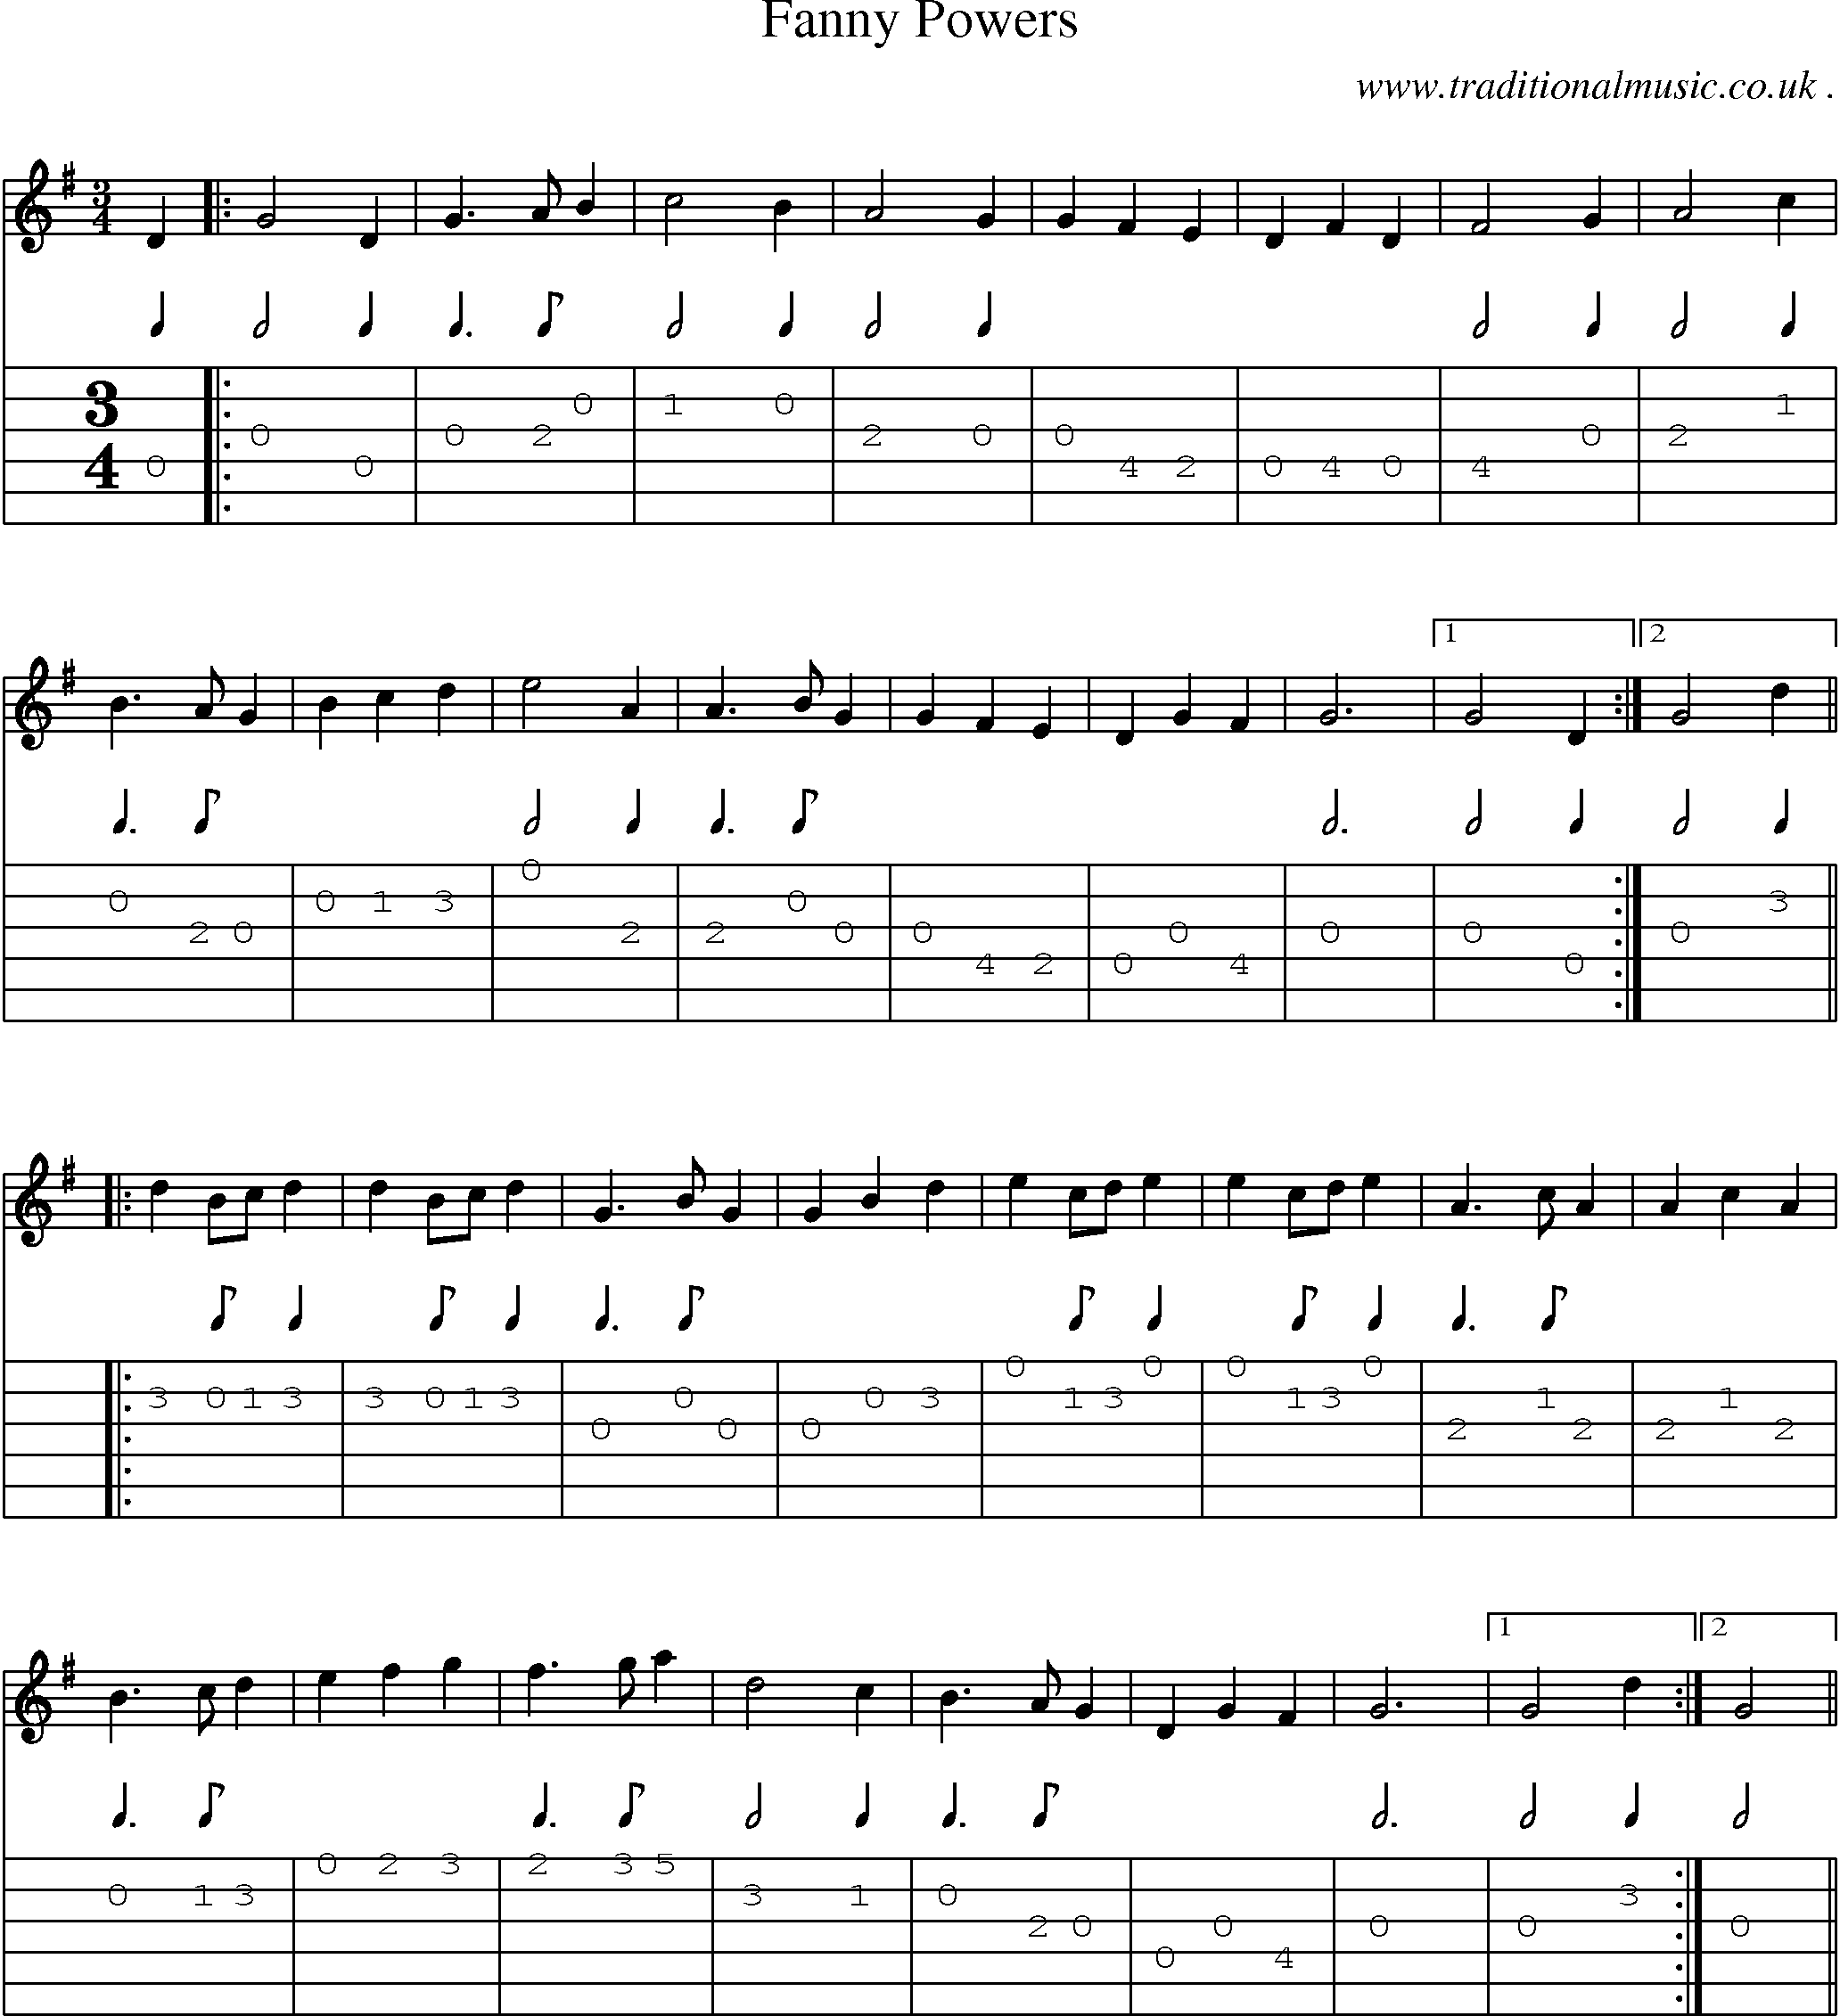 Sheet-Music and Guitar Tabs for Fanny Powers